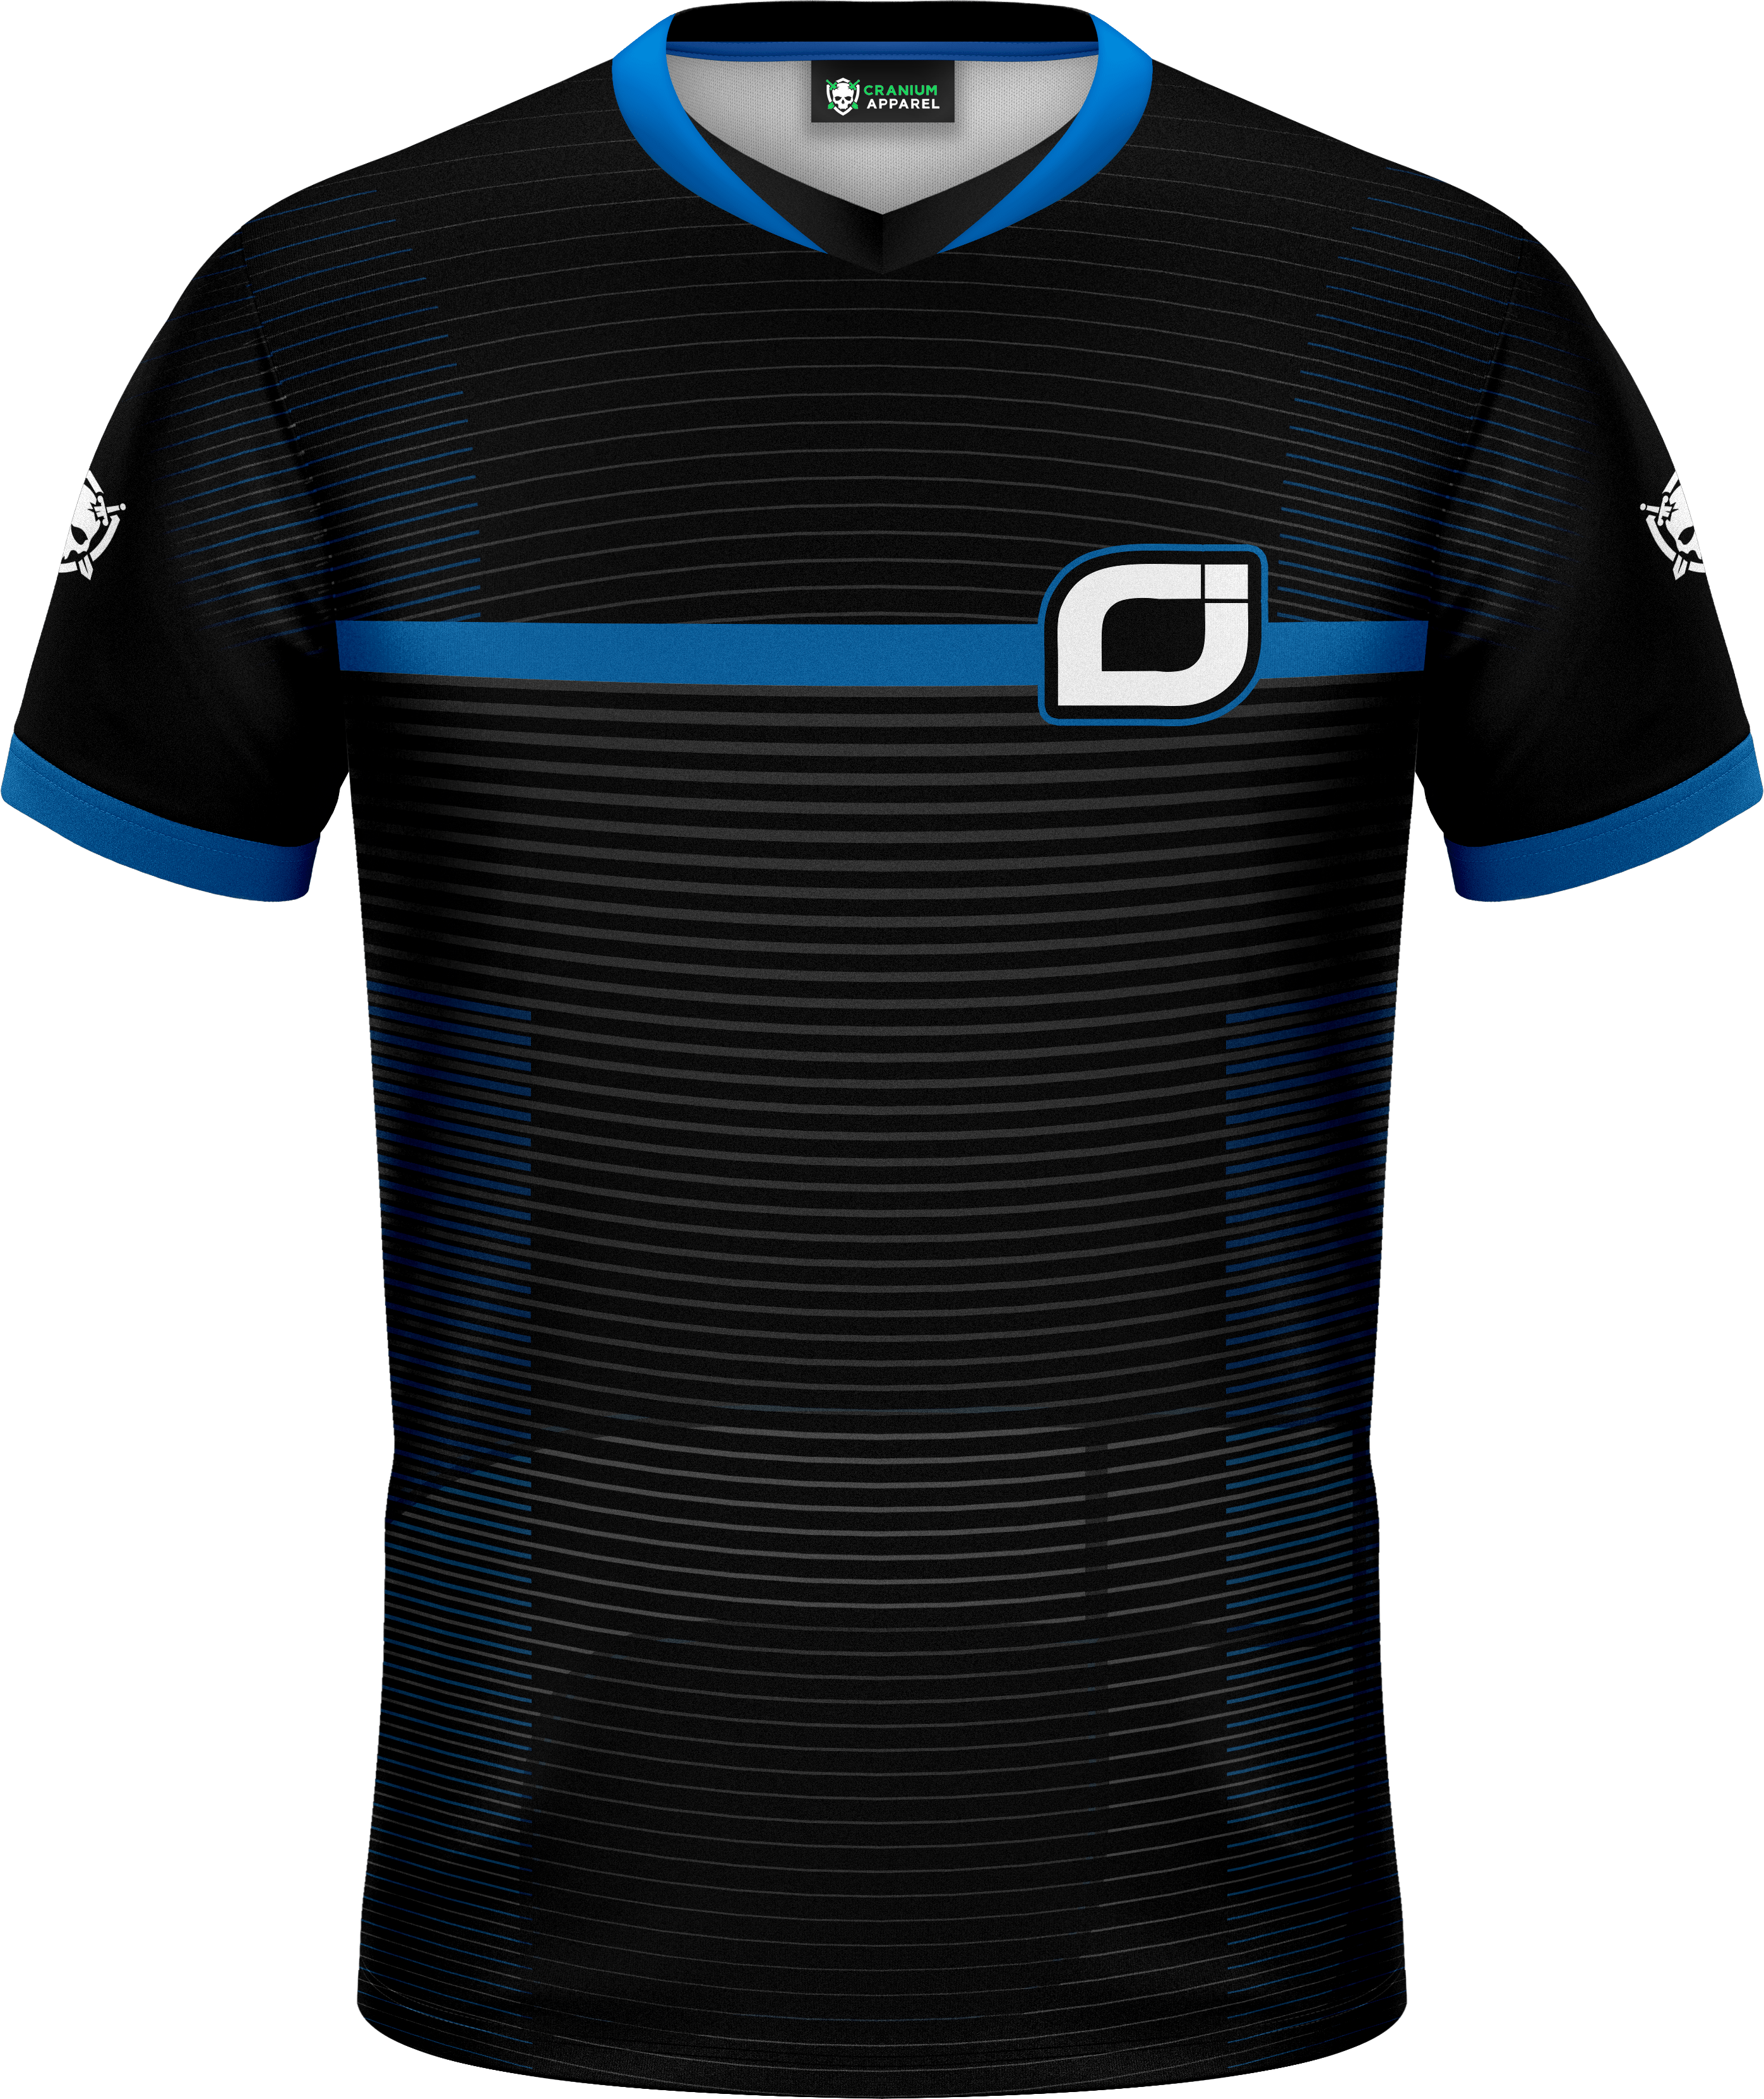 Obey Supremacy Logo - Obey Supremacy Jersey – Cranium Apparel